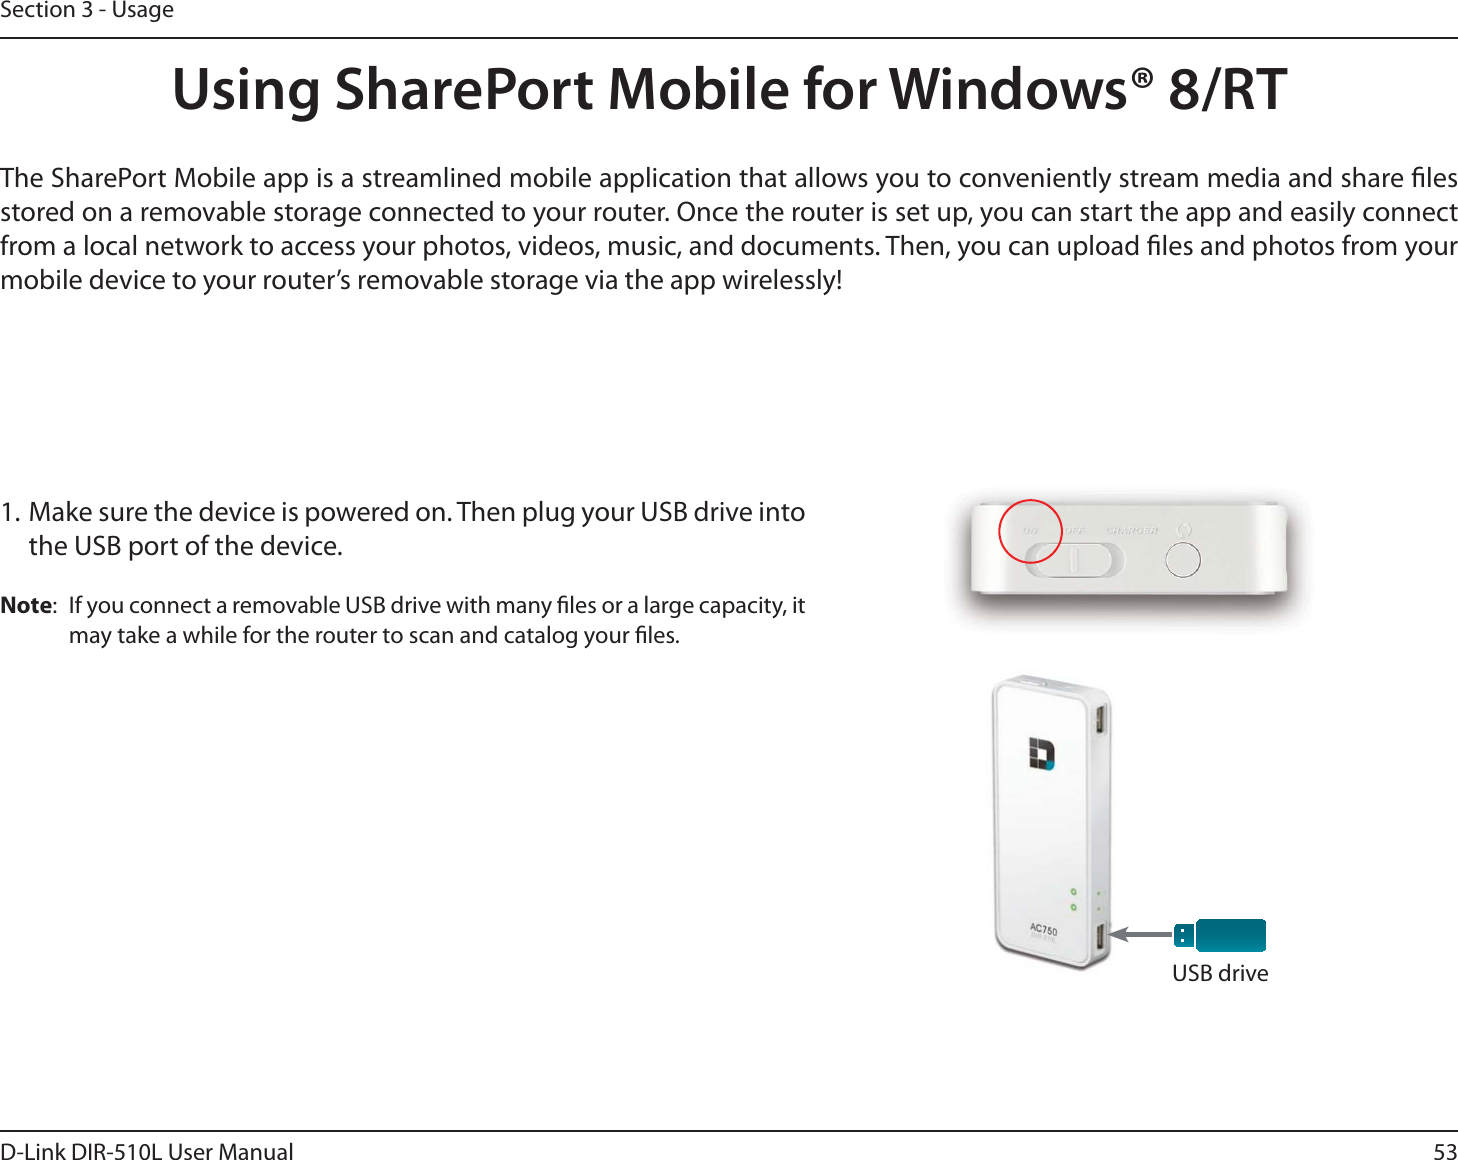 53D-Link DIR-510L User ManualSection 3 - UsageUsing SharePort Mobile for Windows® 8/RTThe SharePort Mobile app is a streamlined mobile application that allows you to conveniently stream media and share les stored on a removable storage connected to your router. Once the router is set up, you can start the app and easily connect from a local network to access your photos, videos, music, and documents. Then, you can upload les and photos from your mobile device to your router’s removable storage via the app wirelessly!1. Make sure the device is powered on. Then plug your USB drive into the USB port of the device.Note:  If you connect a removable USB drive with many les or a large capacity, it may take a while for the router to scan and catalog your les.USB drive